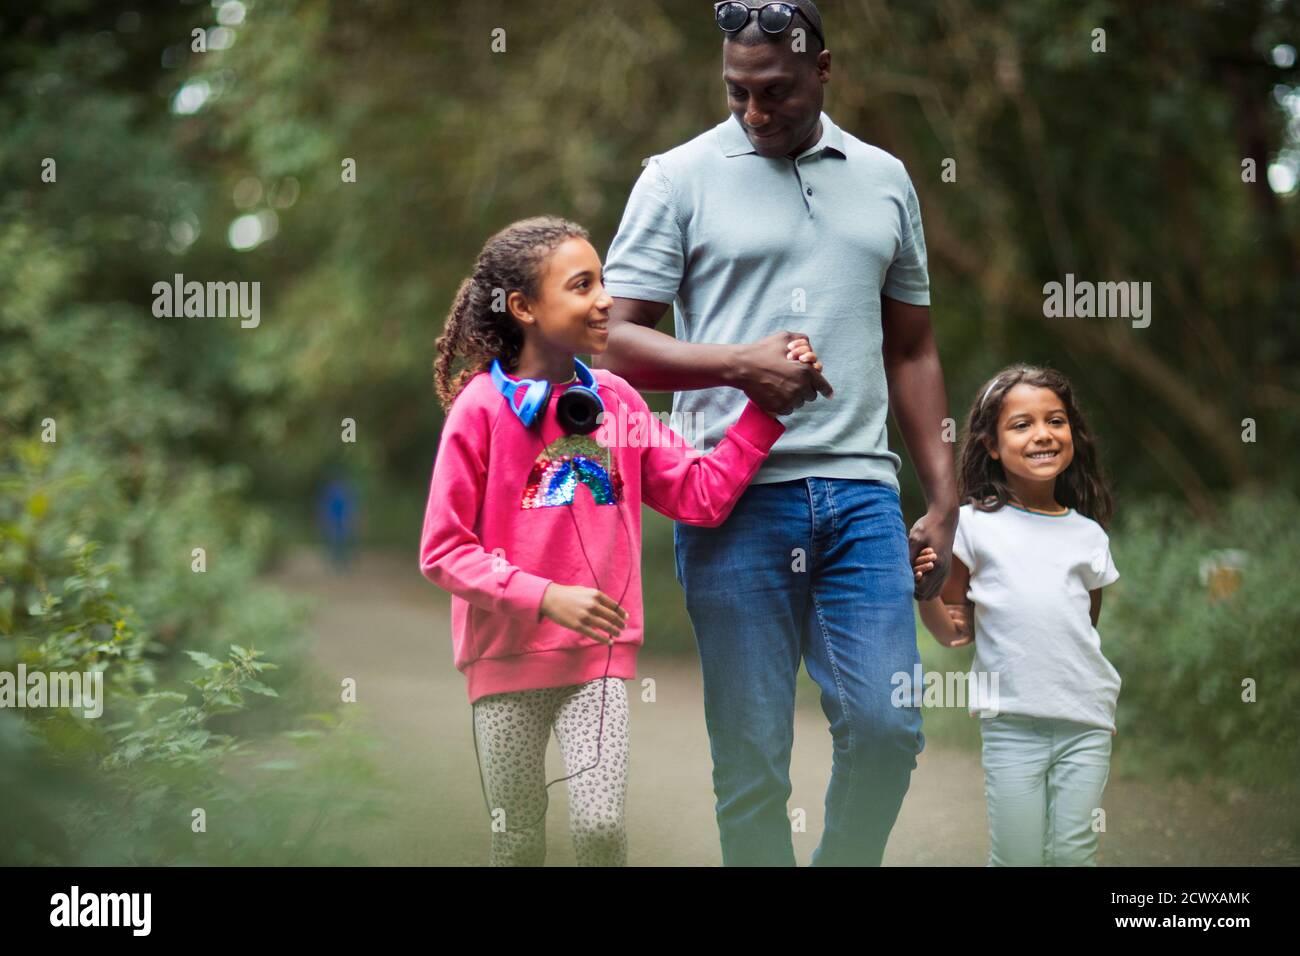 Happy father and daughters holding hands walking on park path Stock Photo